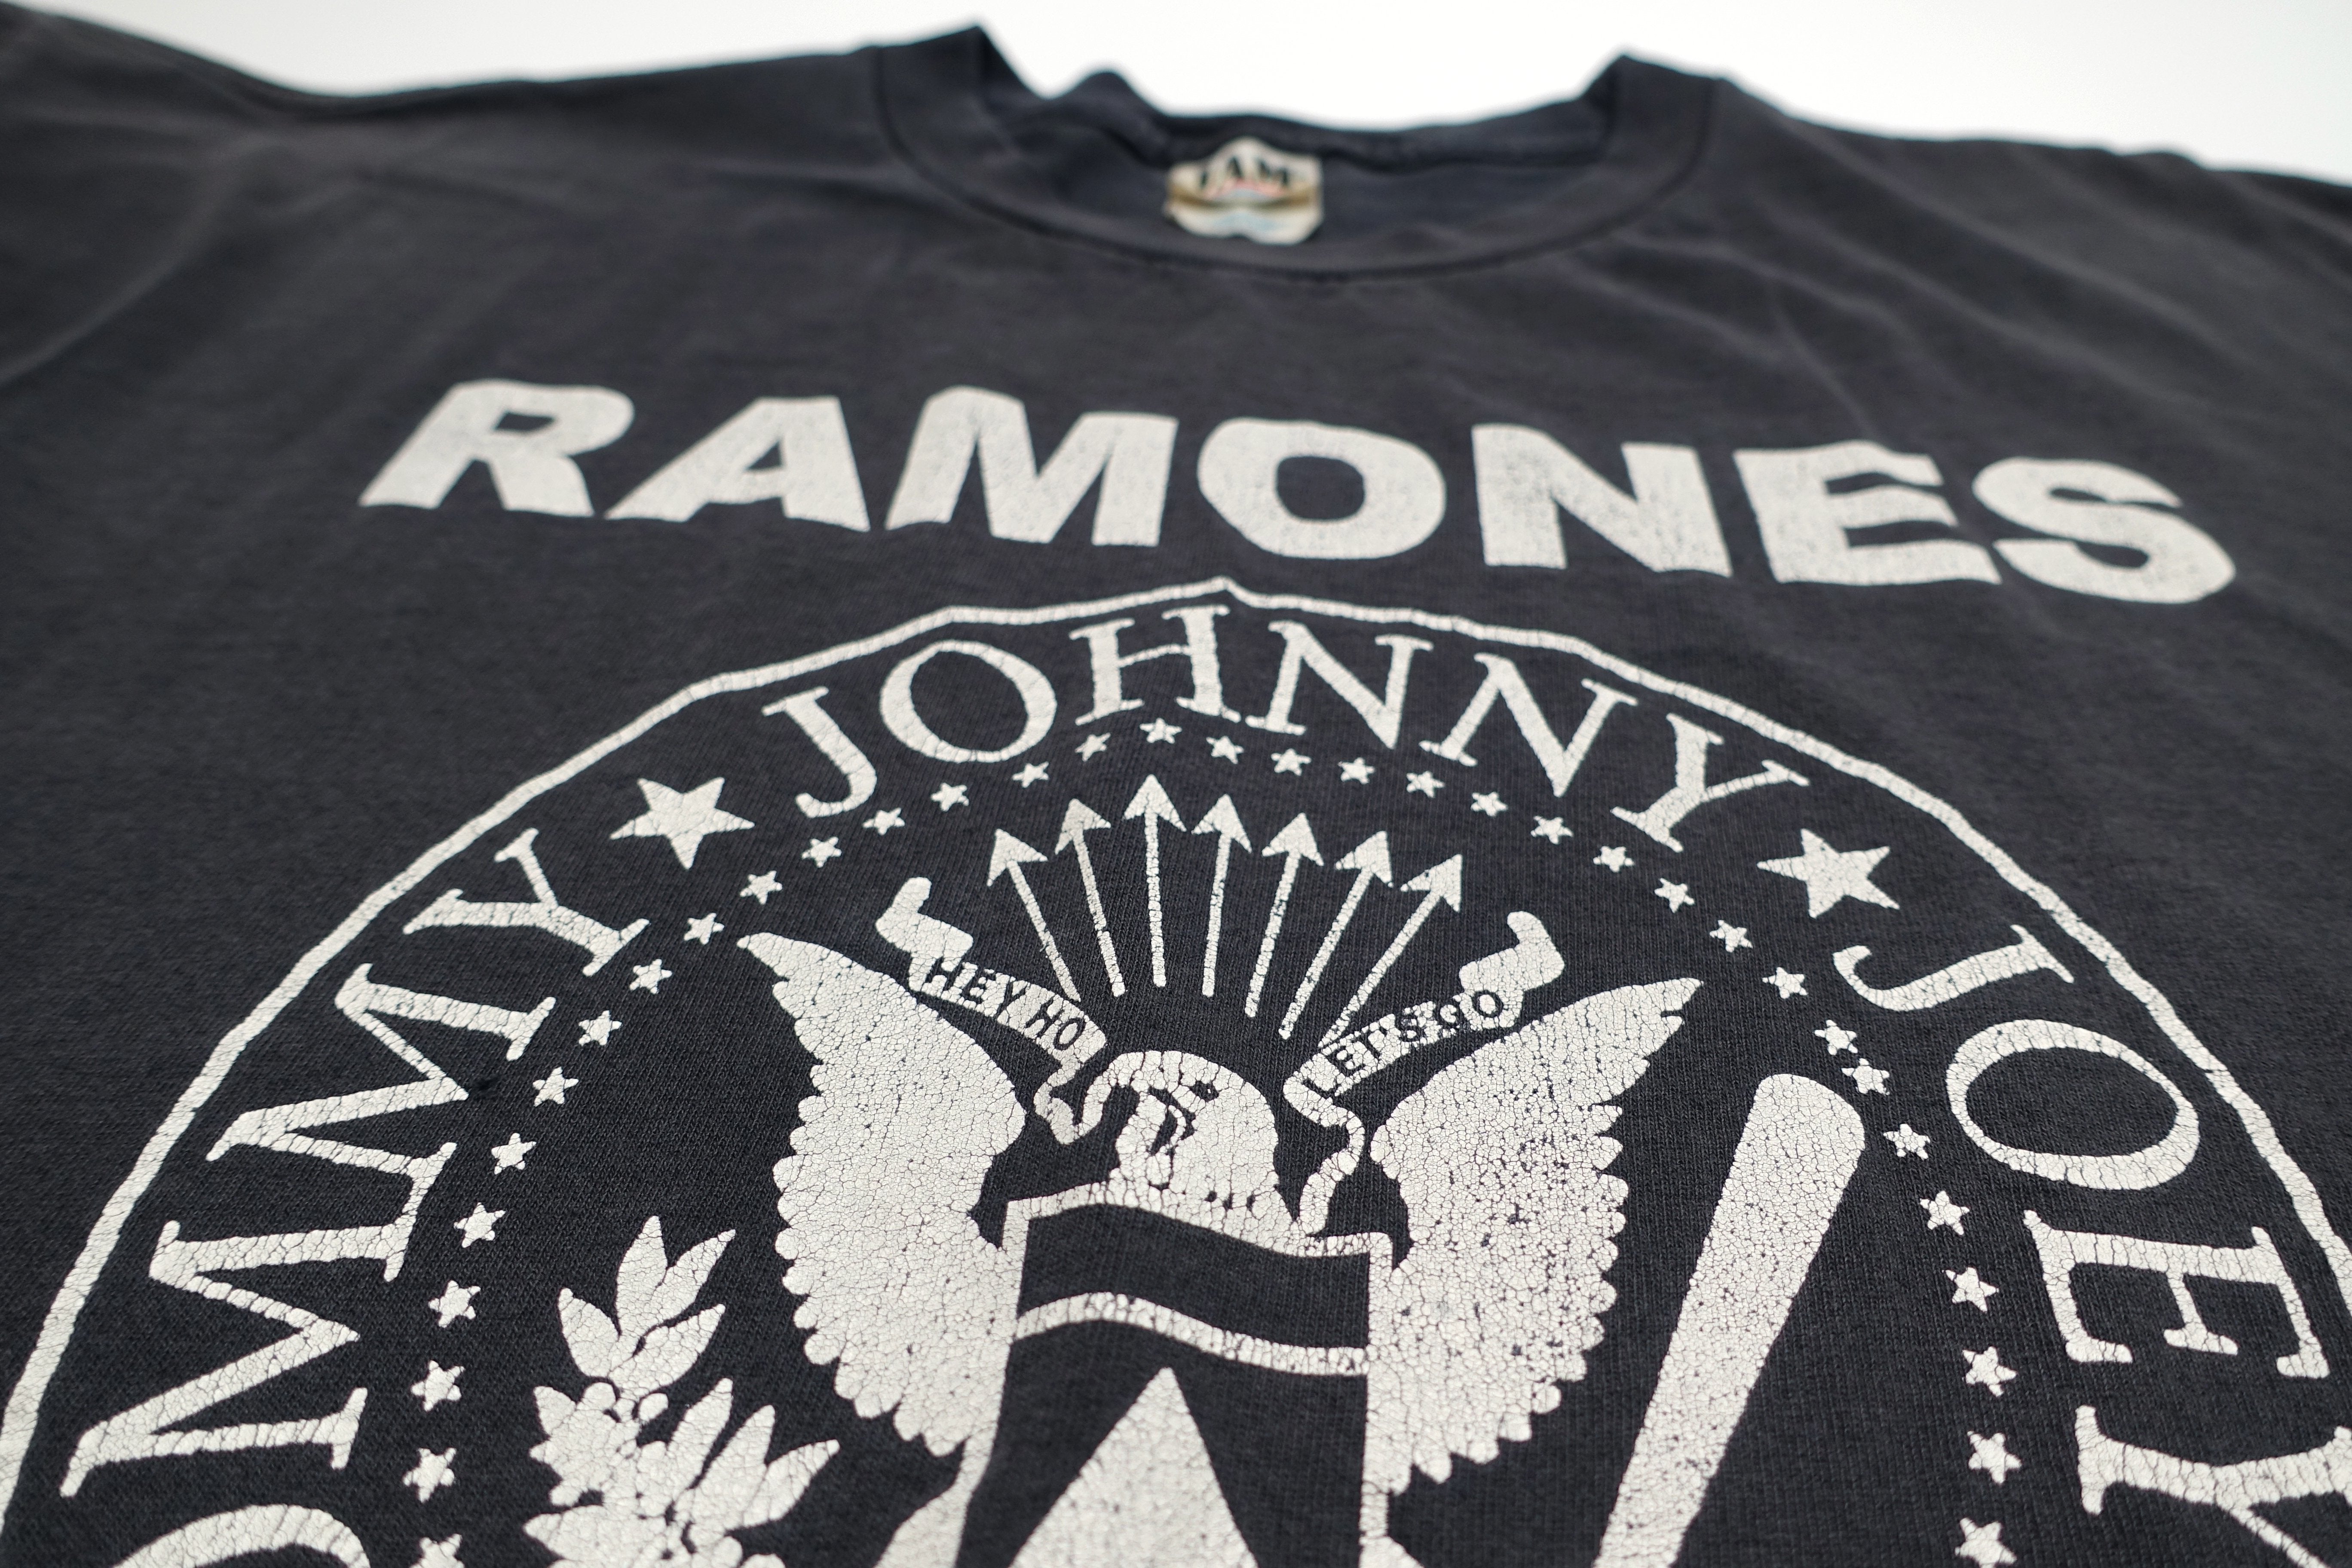 the Ramones - Presidential Seal 2000 Shirt Size XL